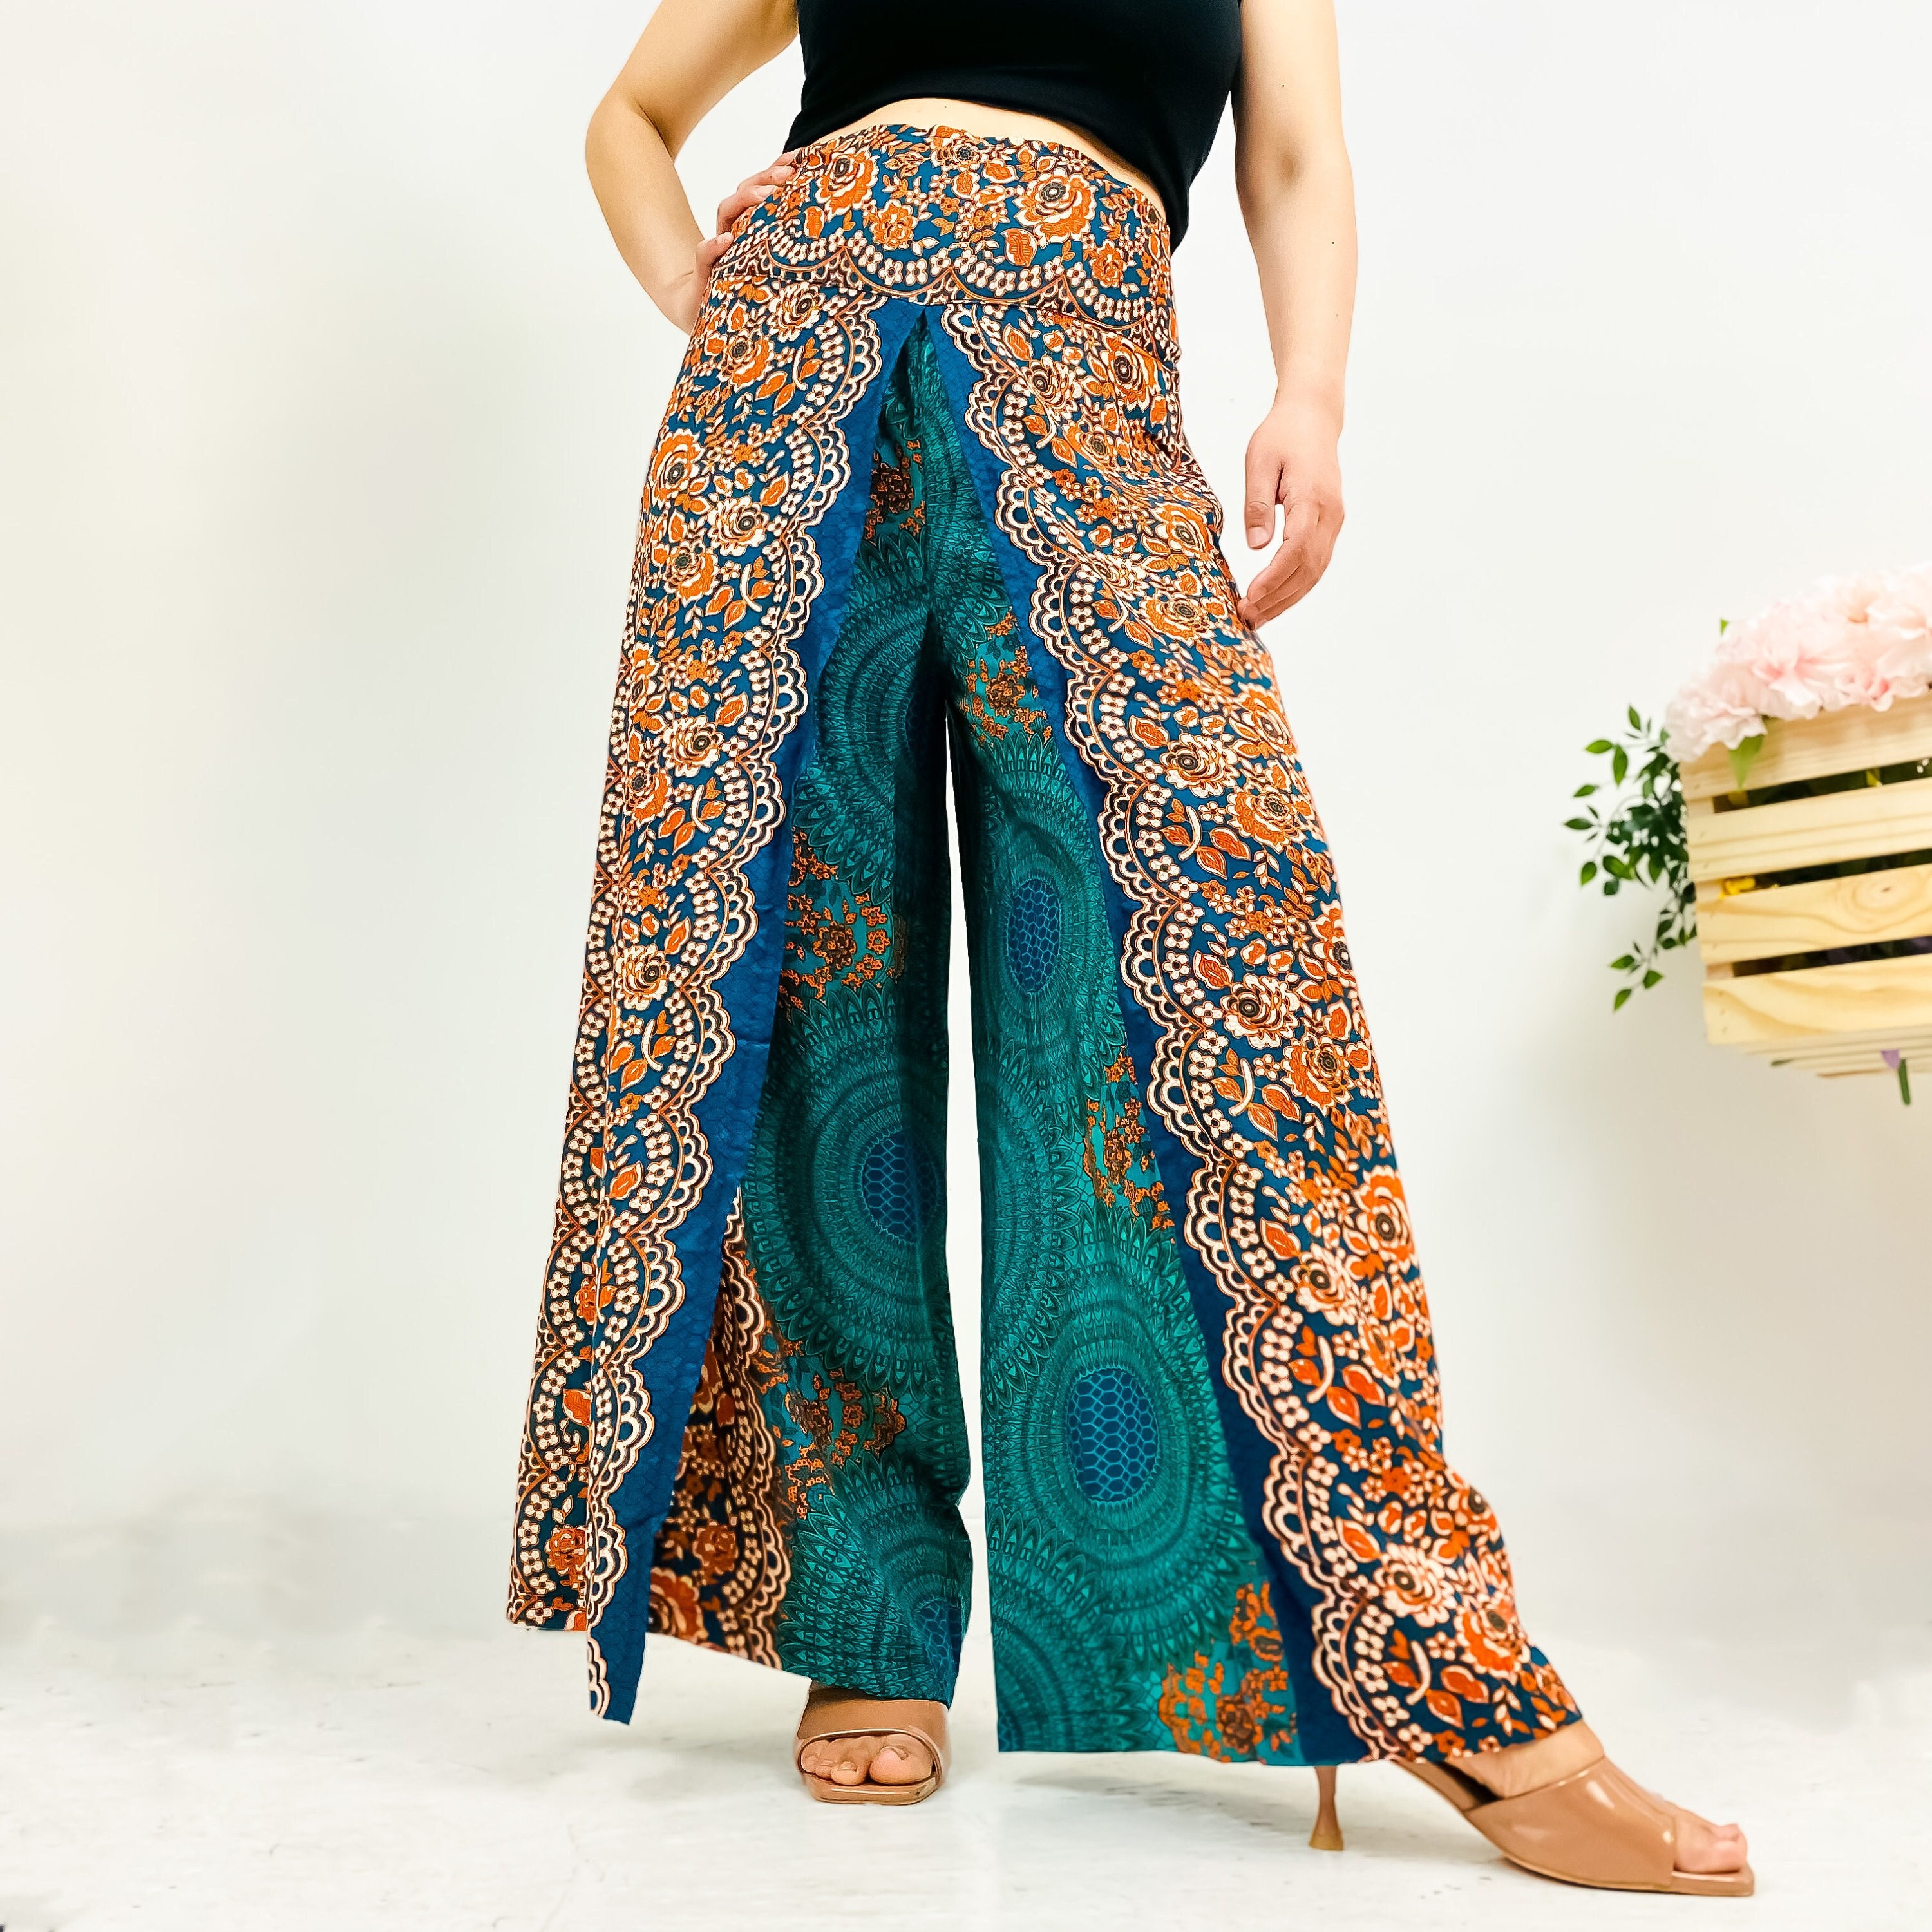 WOMEN PALAZZO PANTS Teal Petite to Plus Sizes Fit All Wide Leg